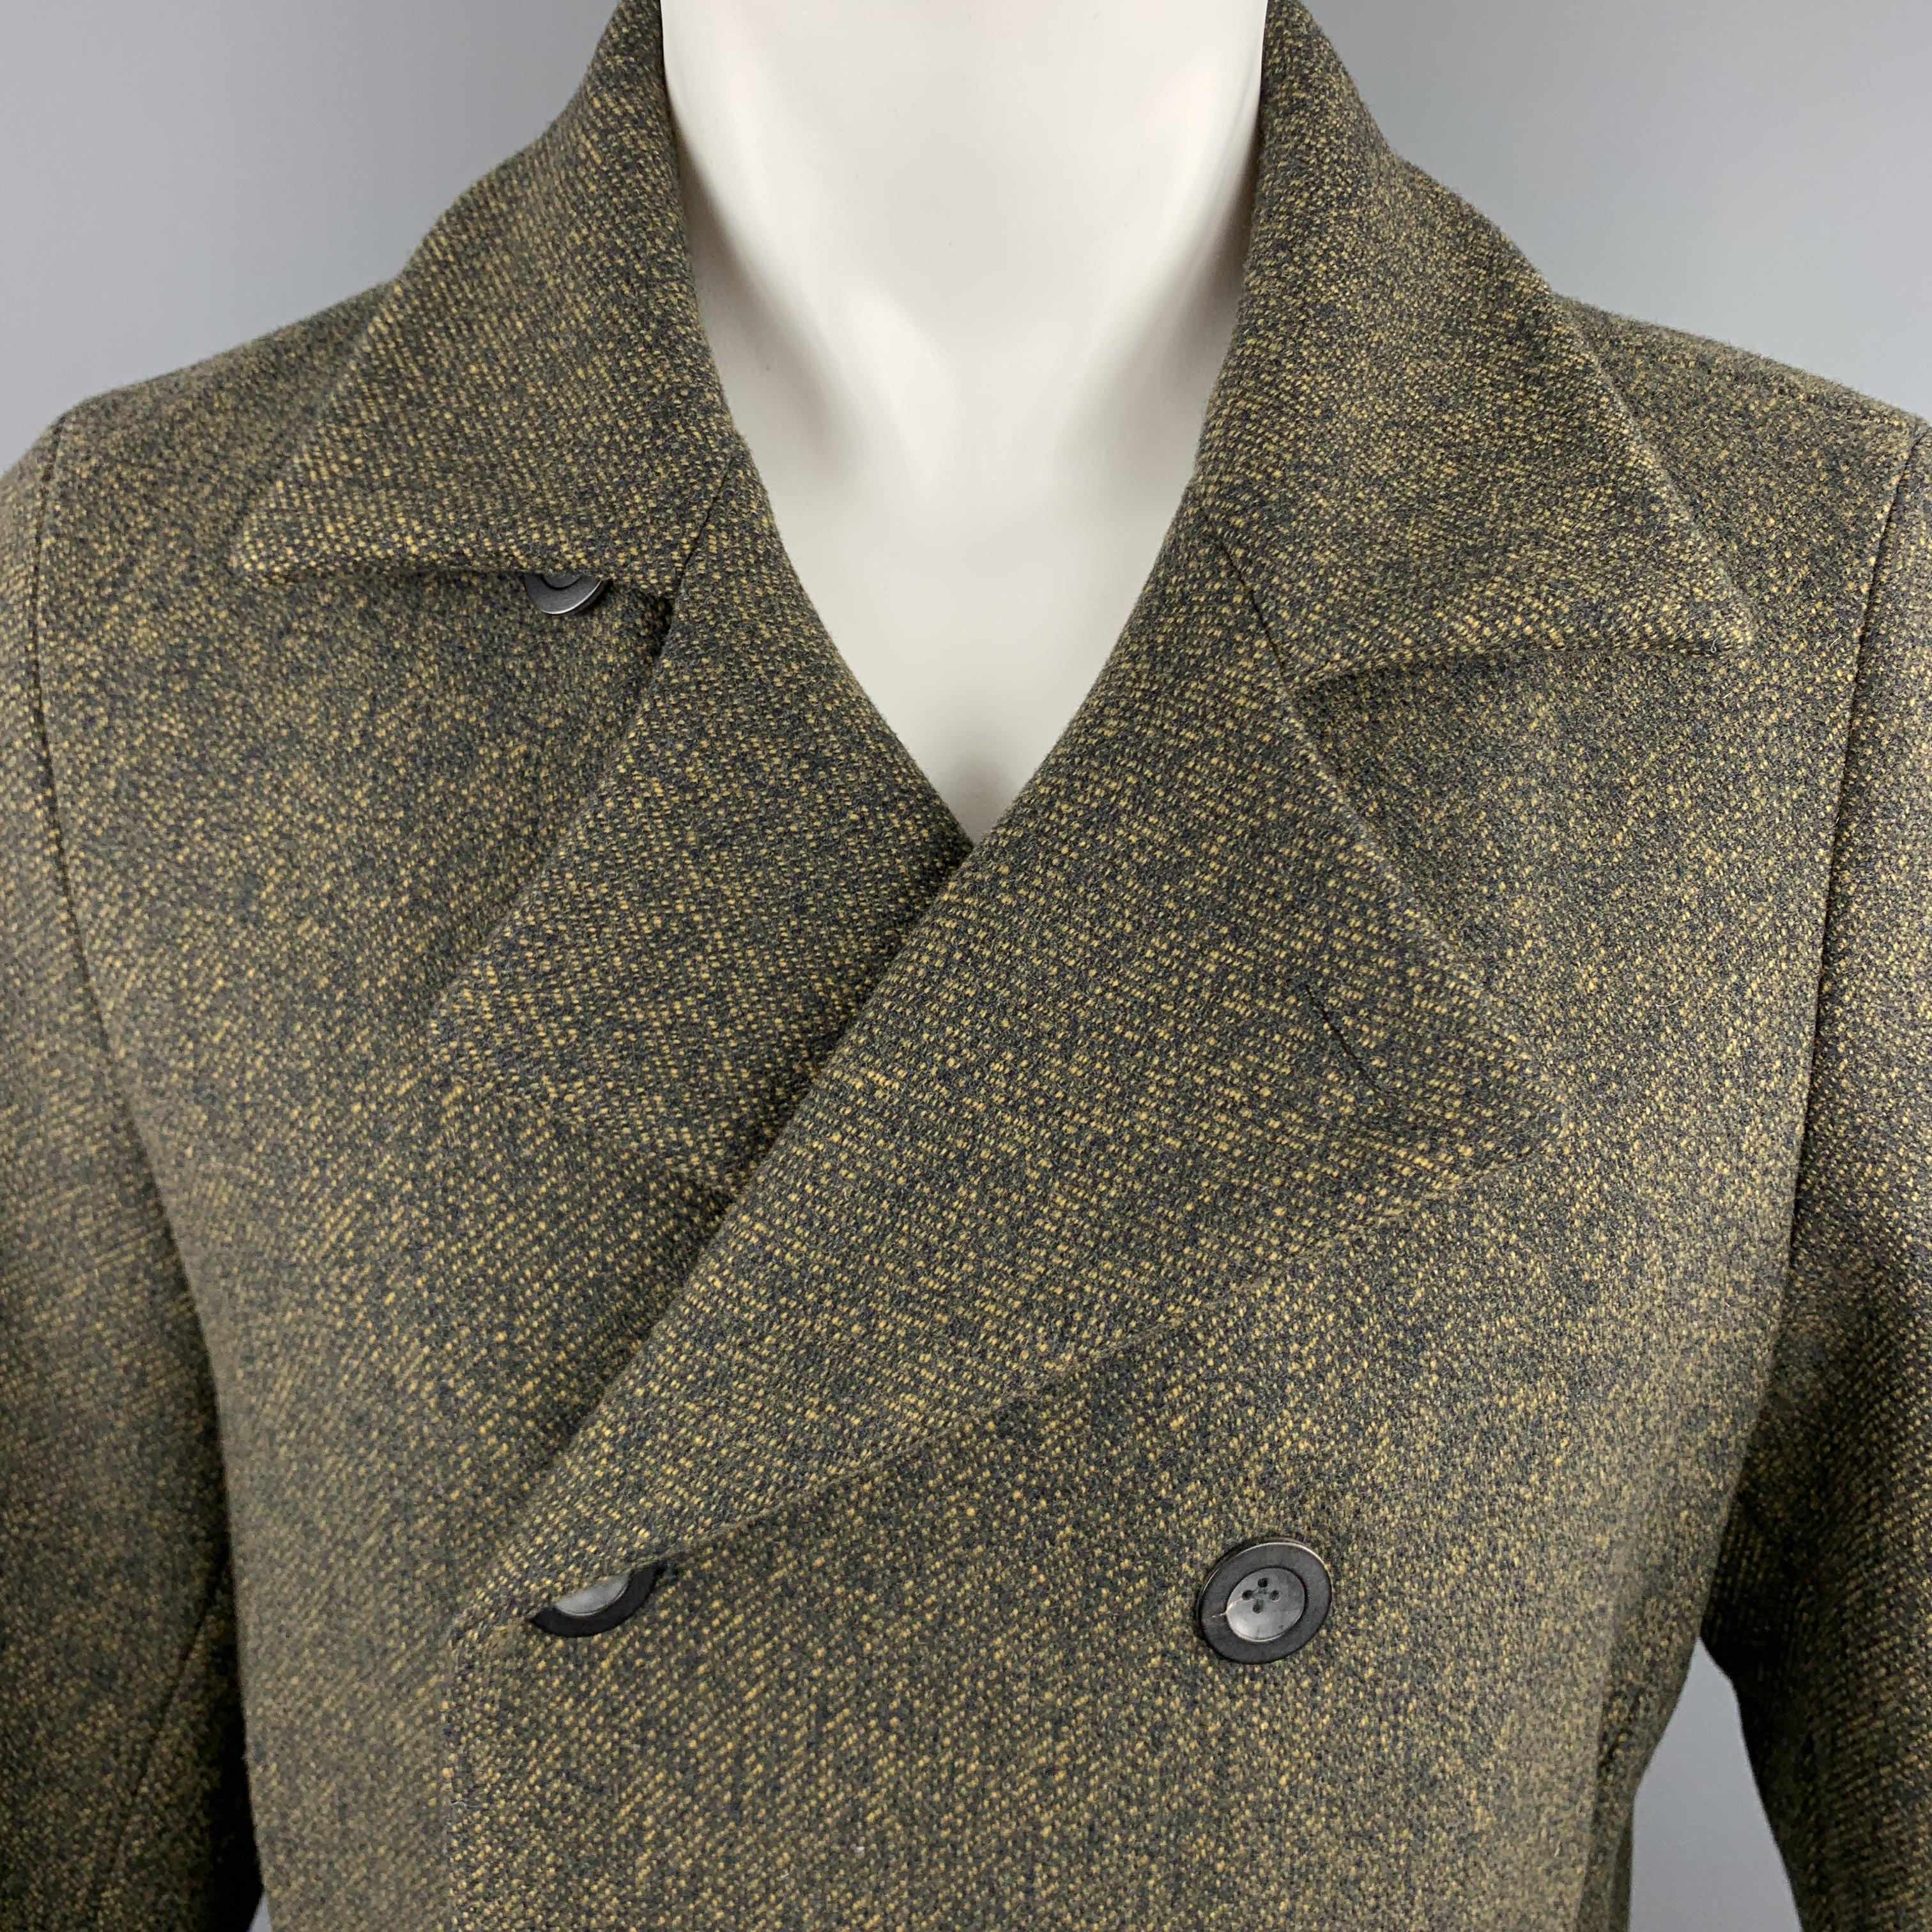 JIL SANDER cropped peacoat comes in olive heathered woven virgin wool with a pointed lapel, double breasted button front, and slanted pockets. Made in Italy.

Excellent Pre-Owned Condition.
Marked: IT 50

Measurements:

Shoulder: 16 in.
Chest: 44